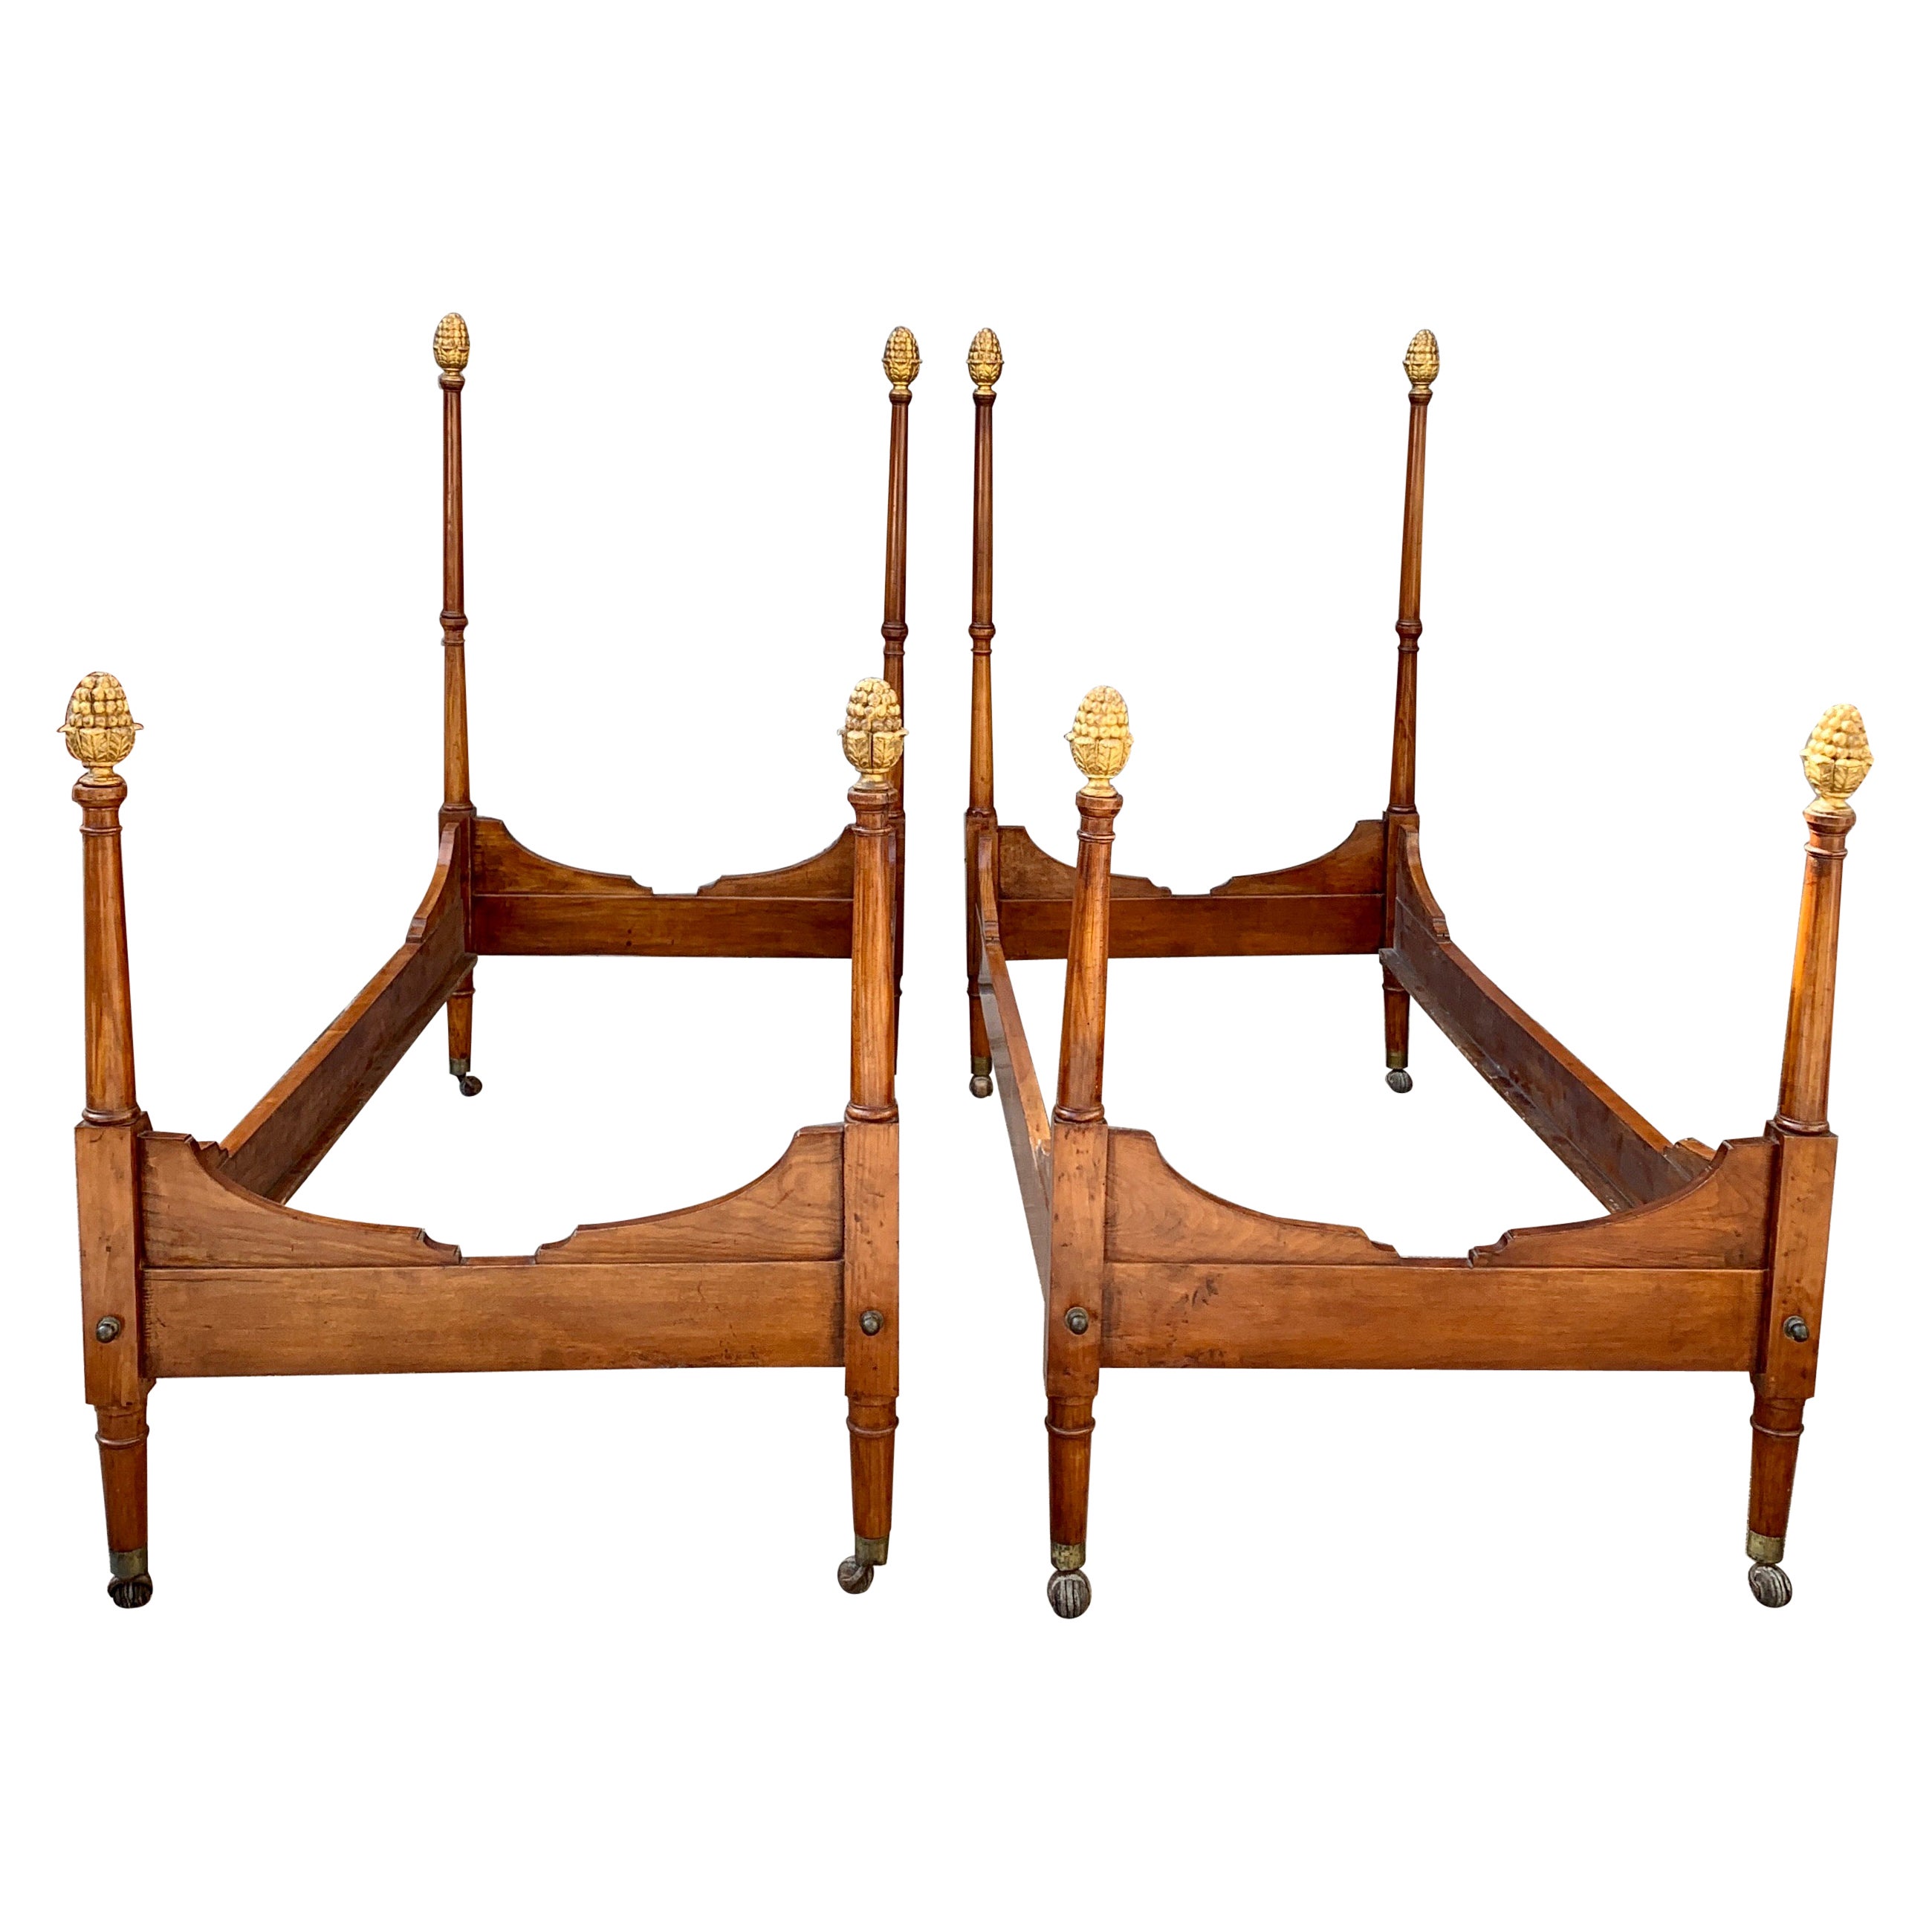 Pair of Period Empire Beds from Tuscany Italy, circa 1810